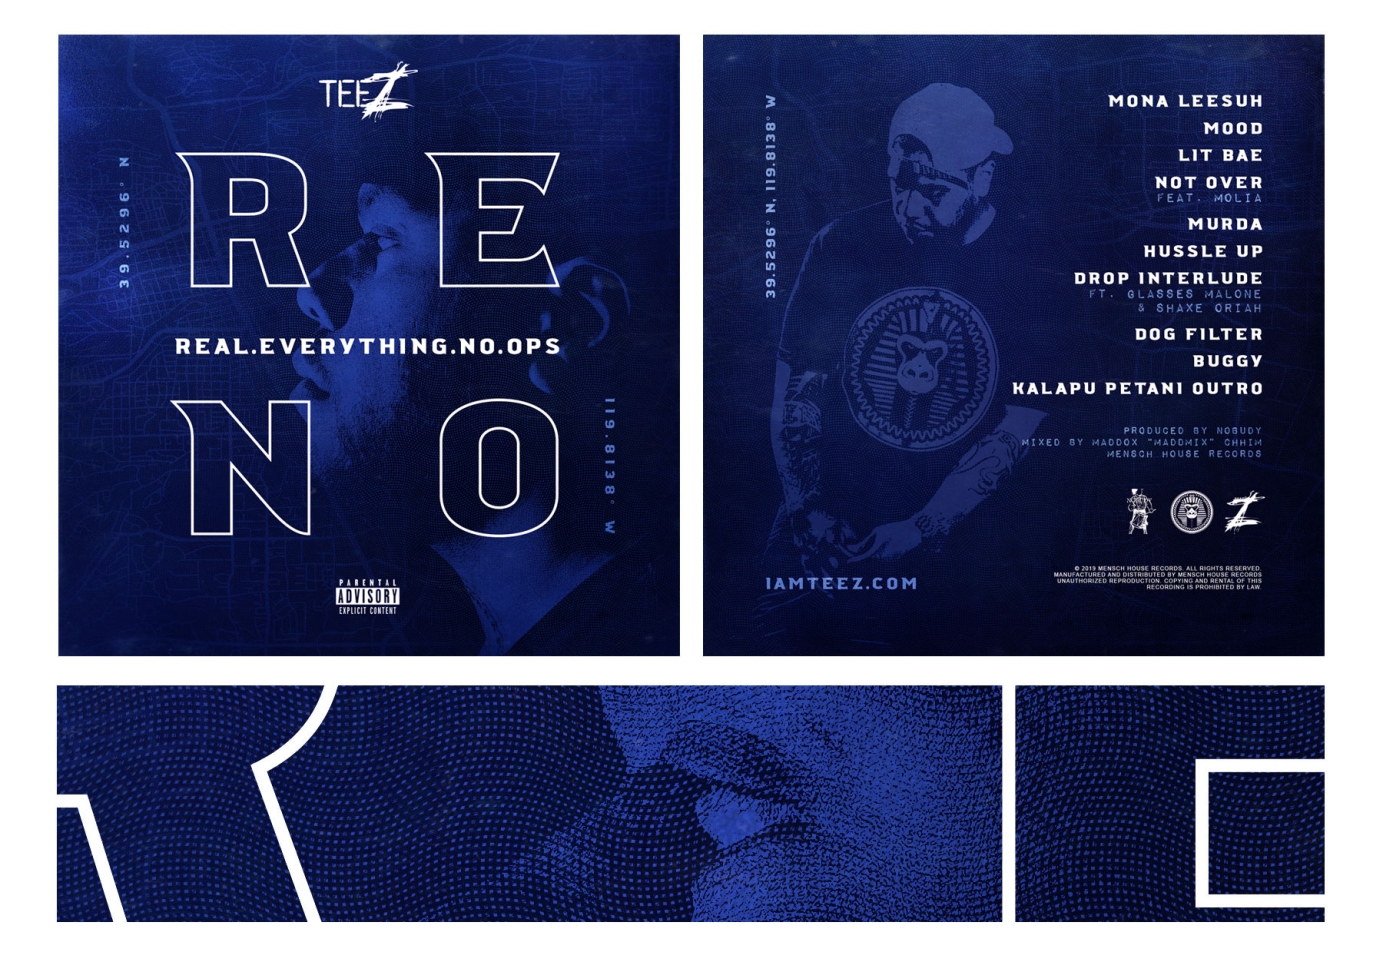 Artwork for Teez by three29design